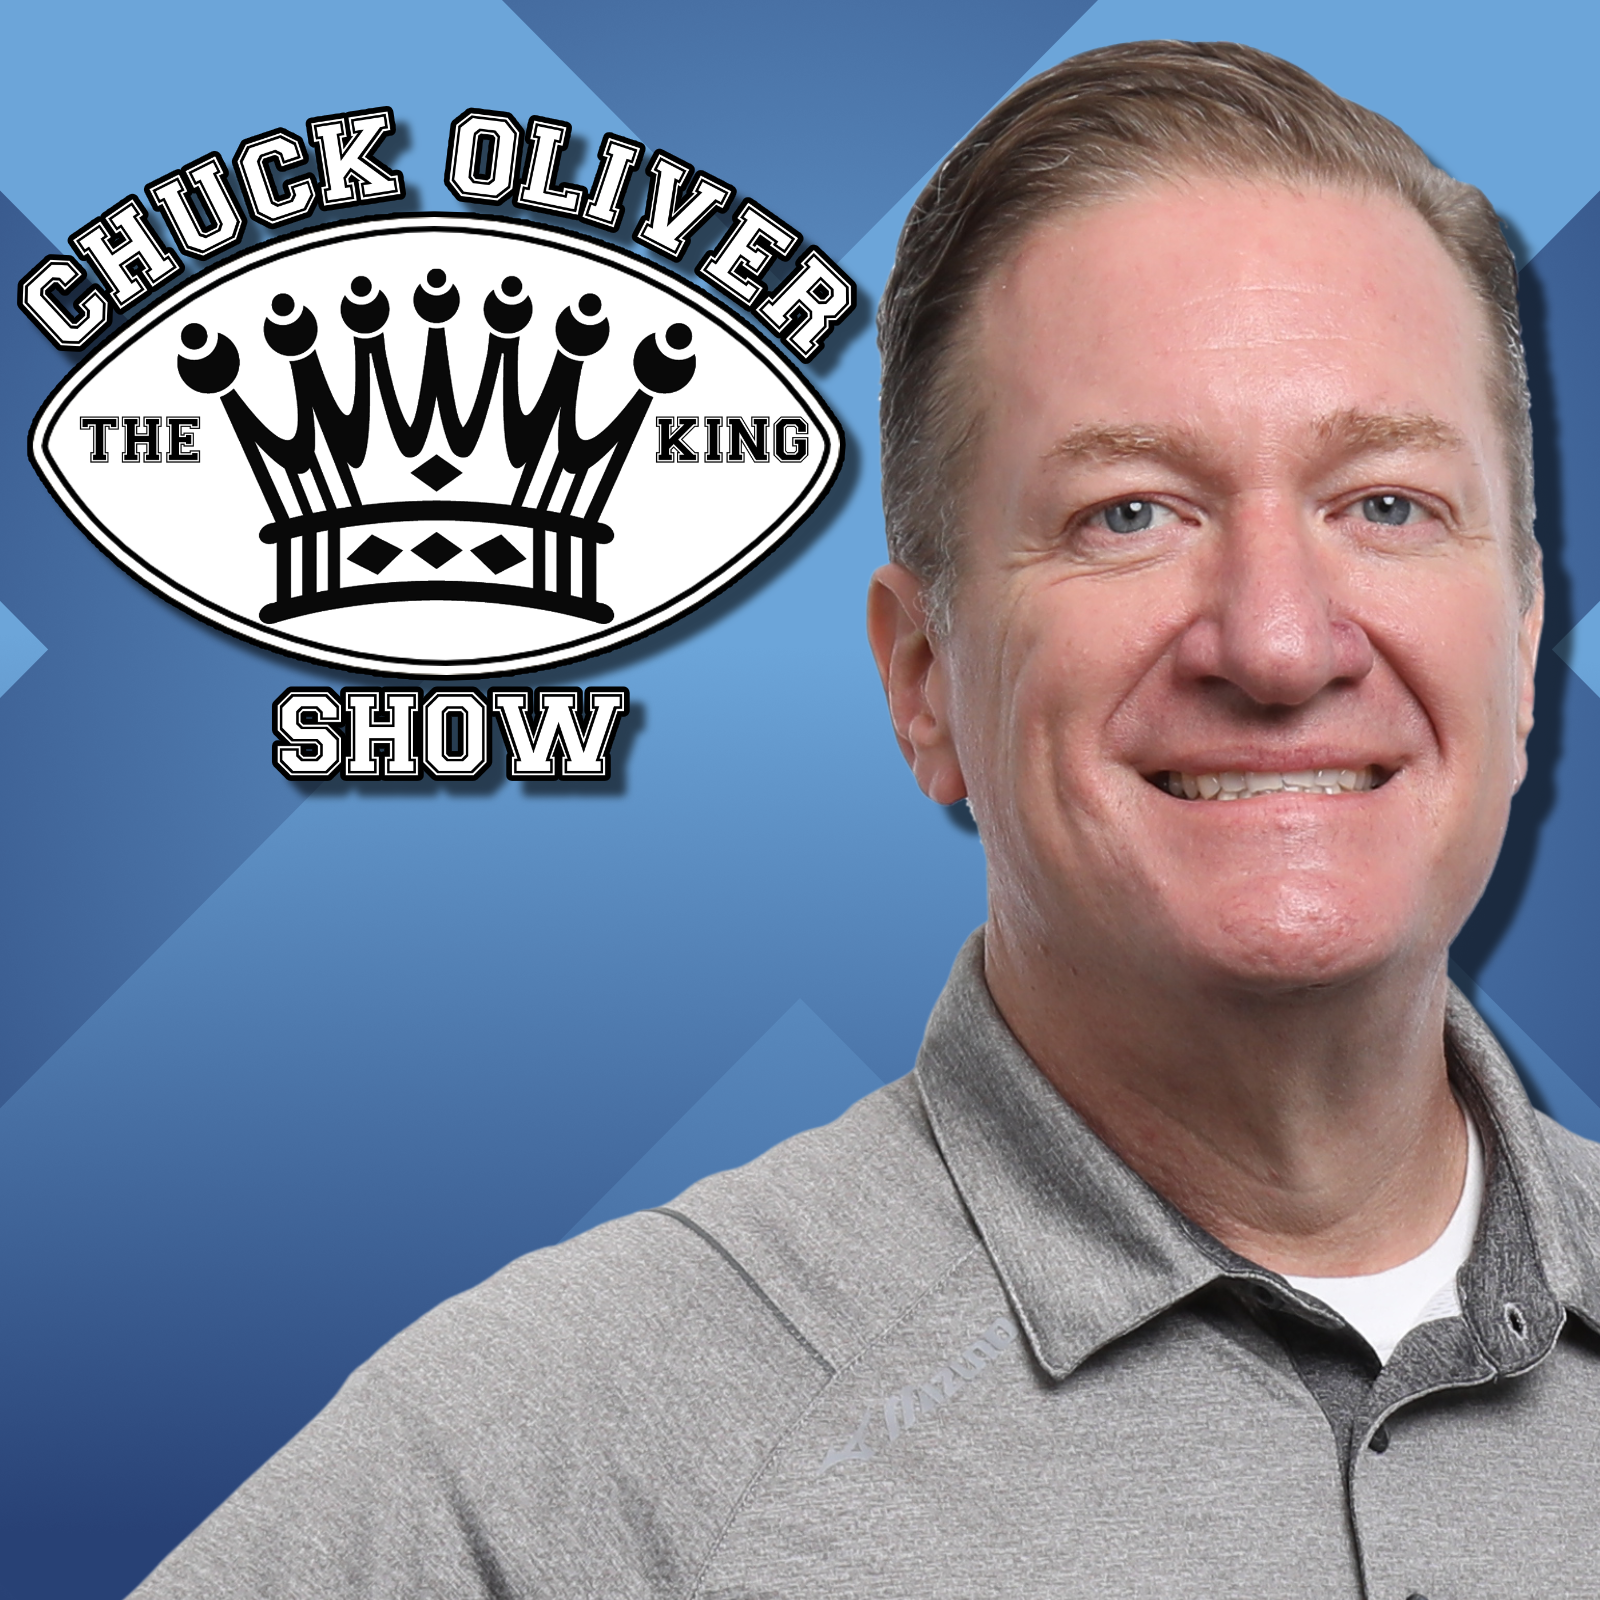 CHUCK OLIVER SHOW 4-26 FRIDAY HOUR 1